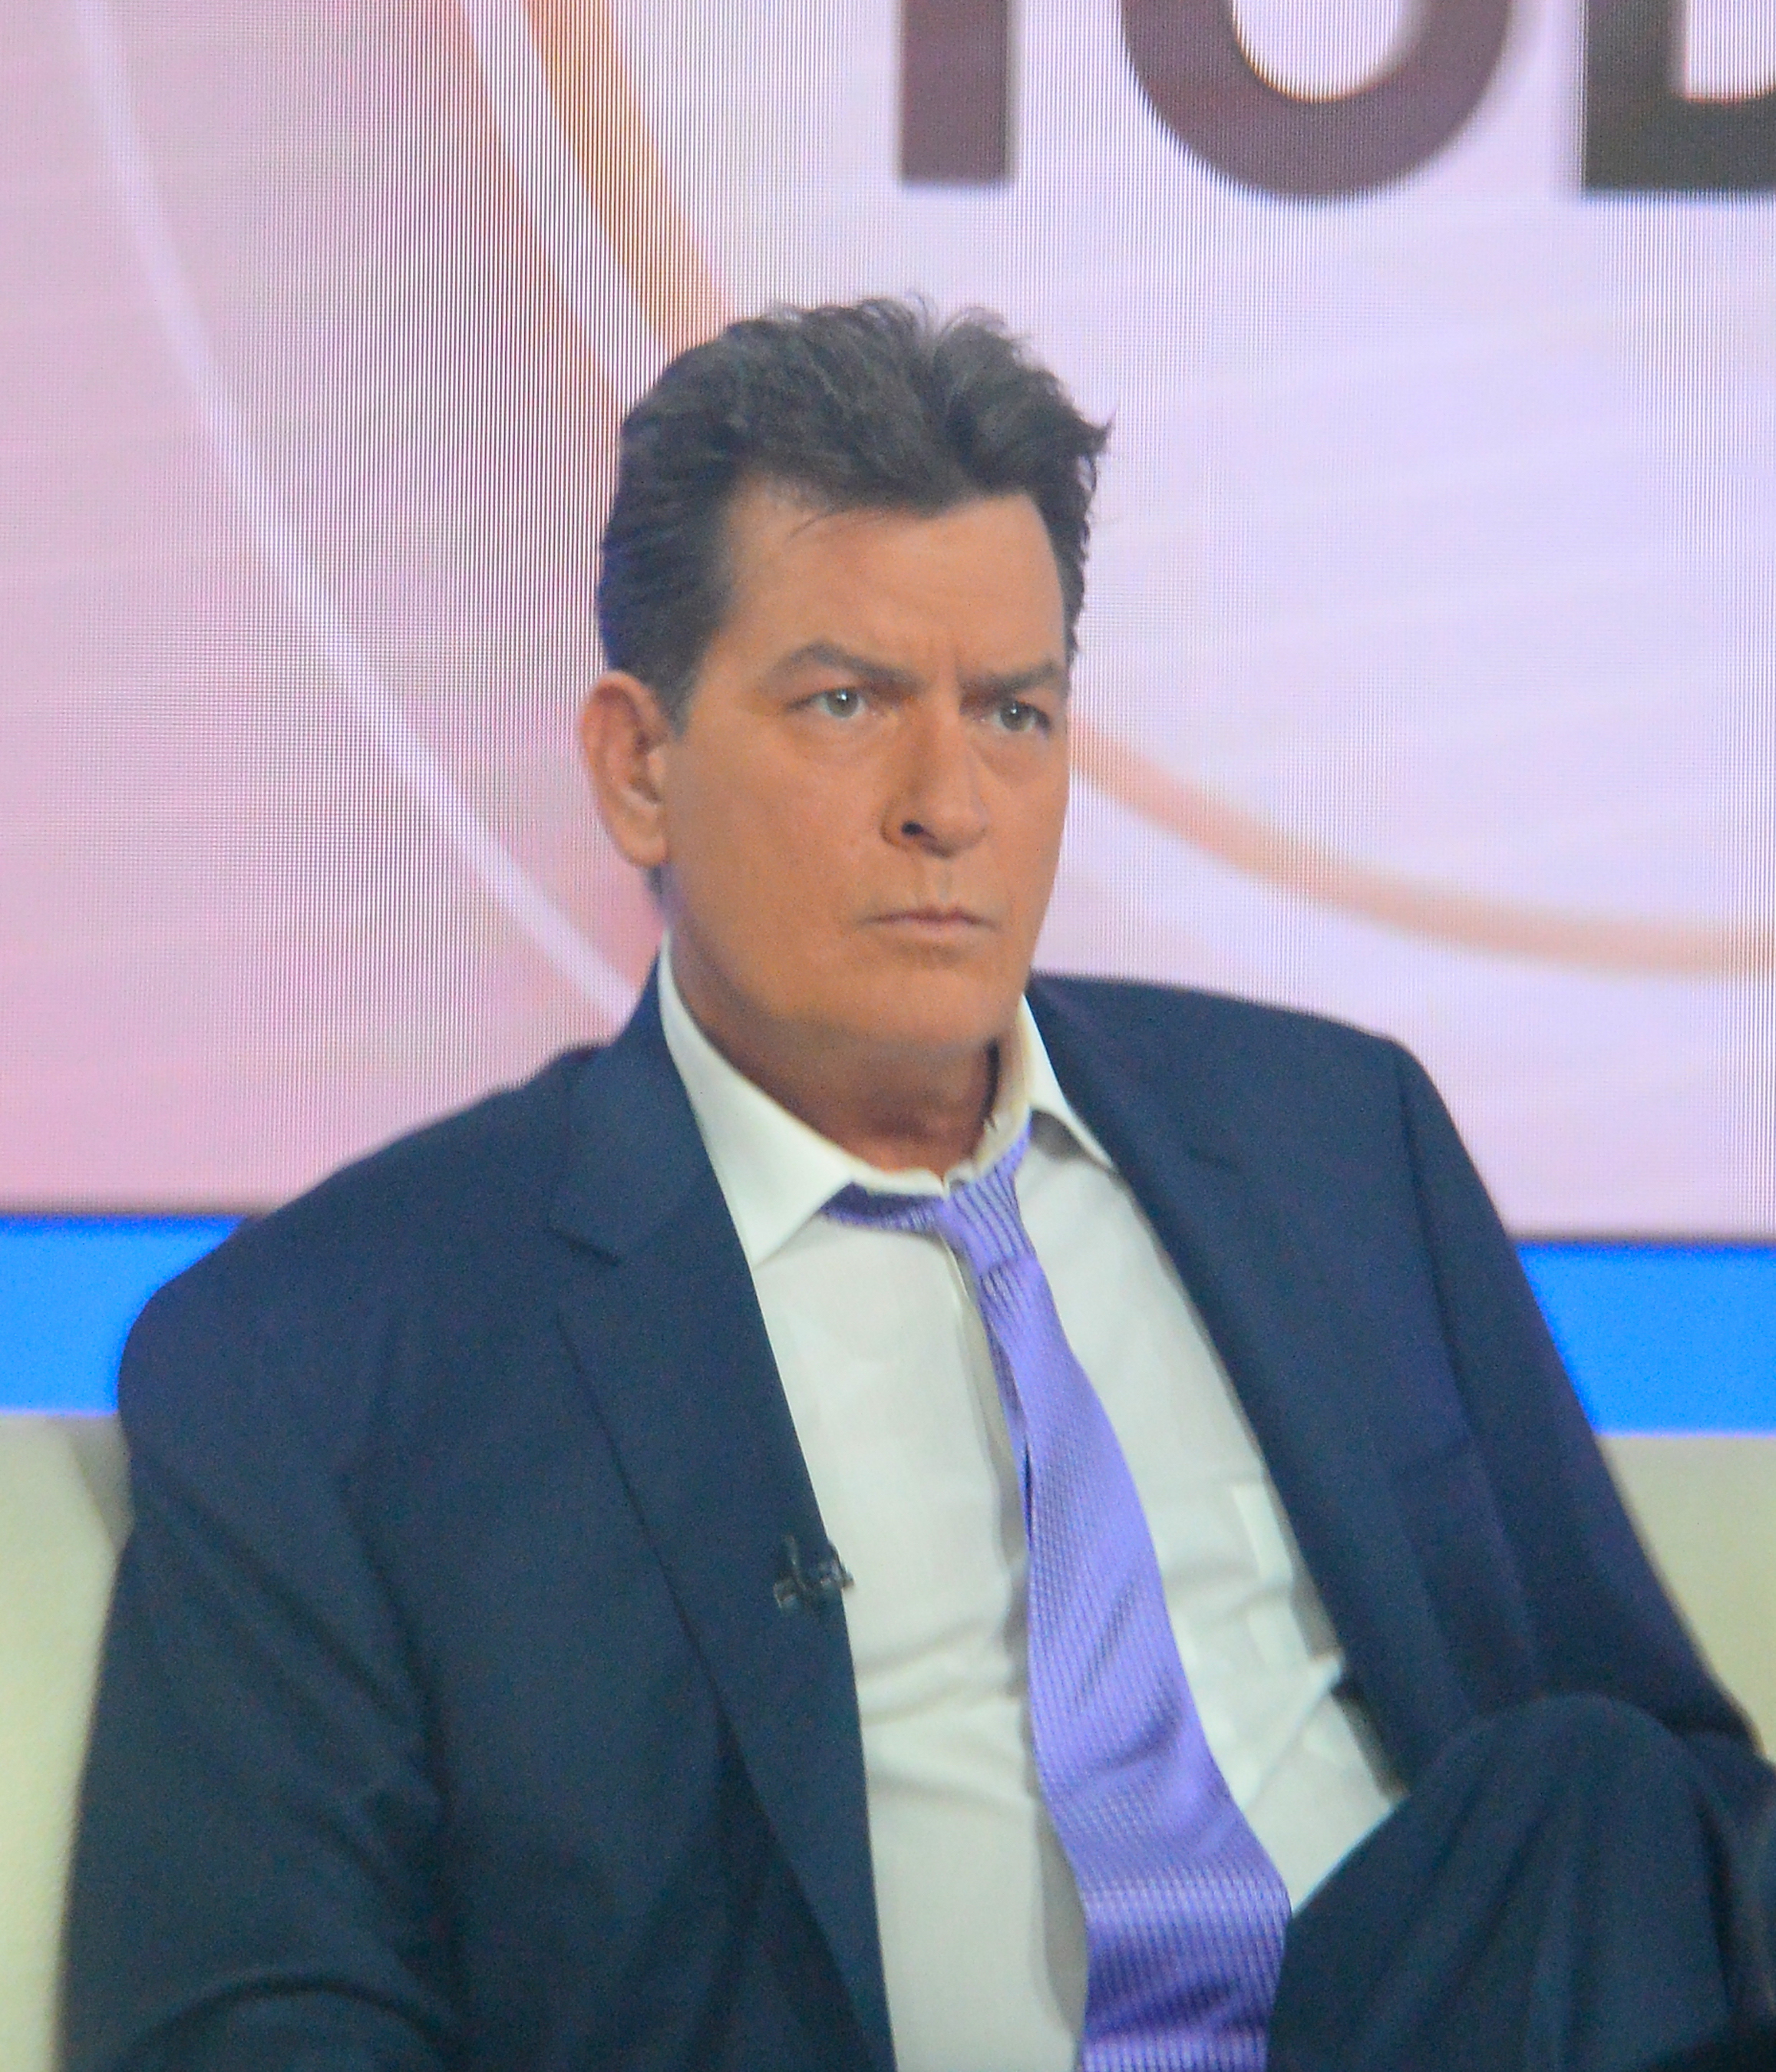 Charlie Sheen Makes A Revealing Personal Announcement On NBC's TODAY Show